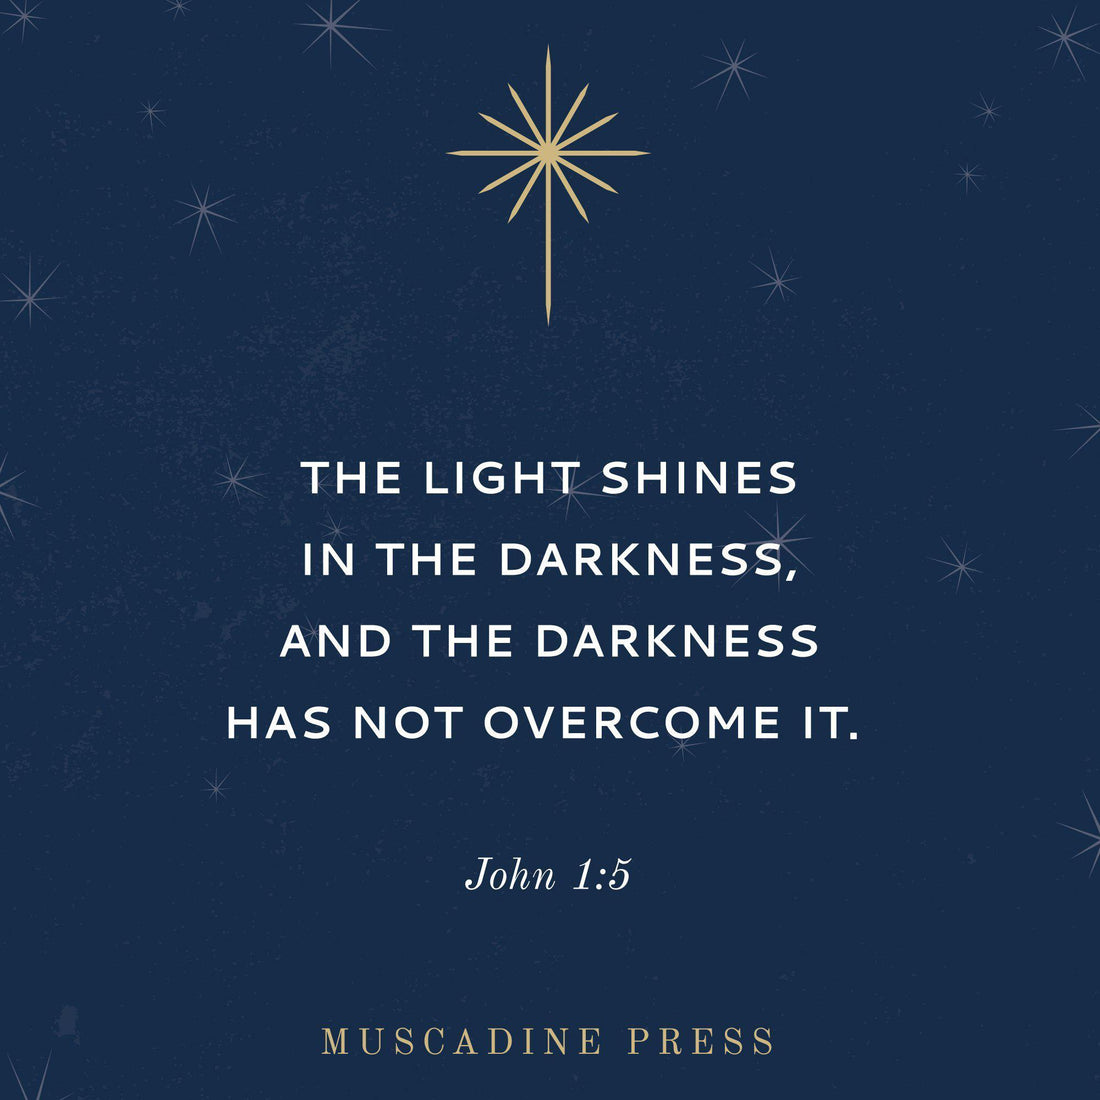 The Light Shines in the Darkness-Muscadine Press